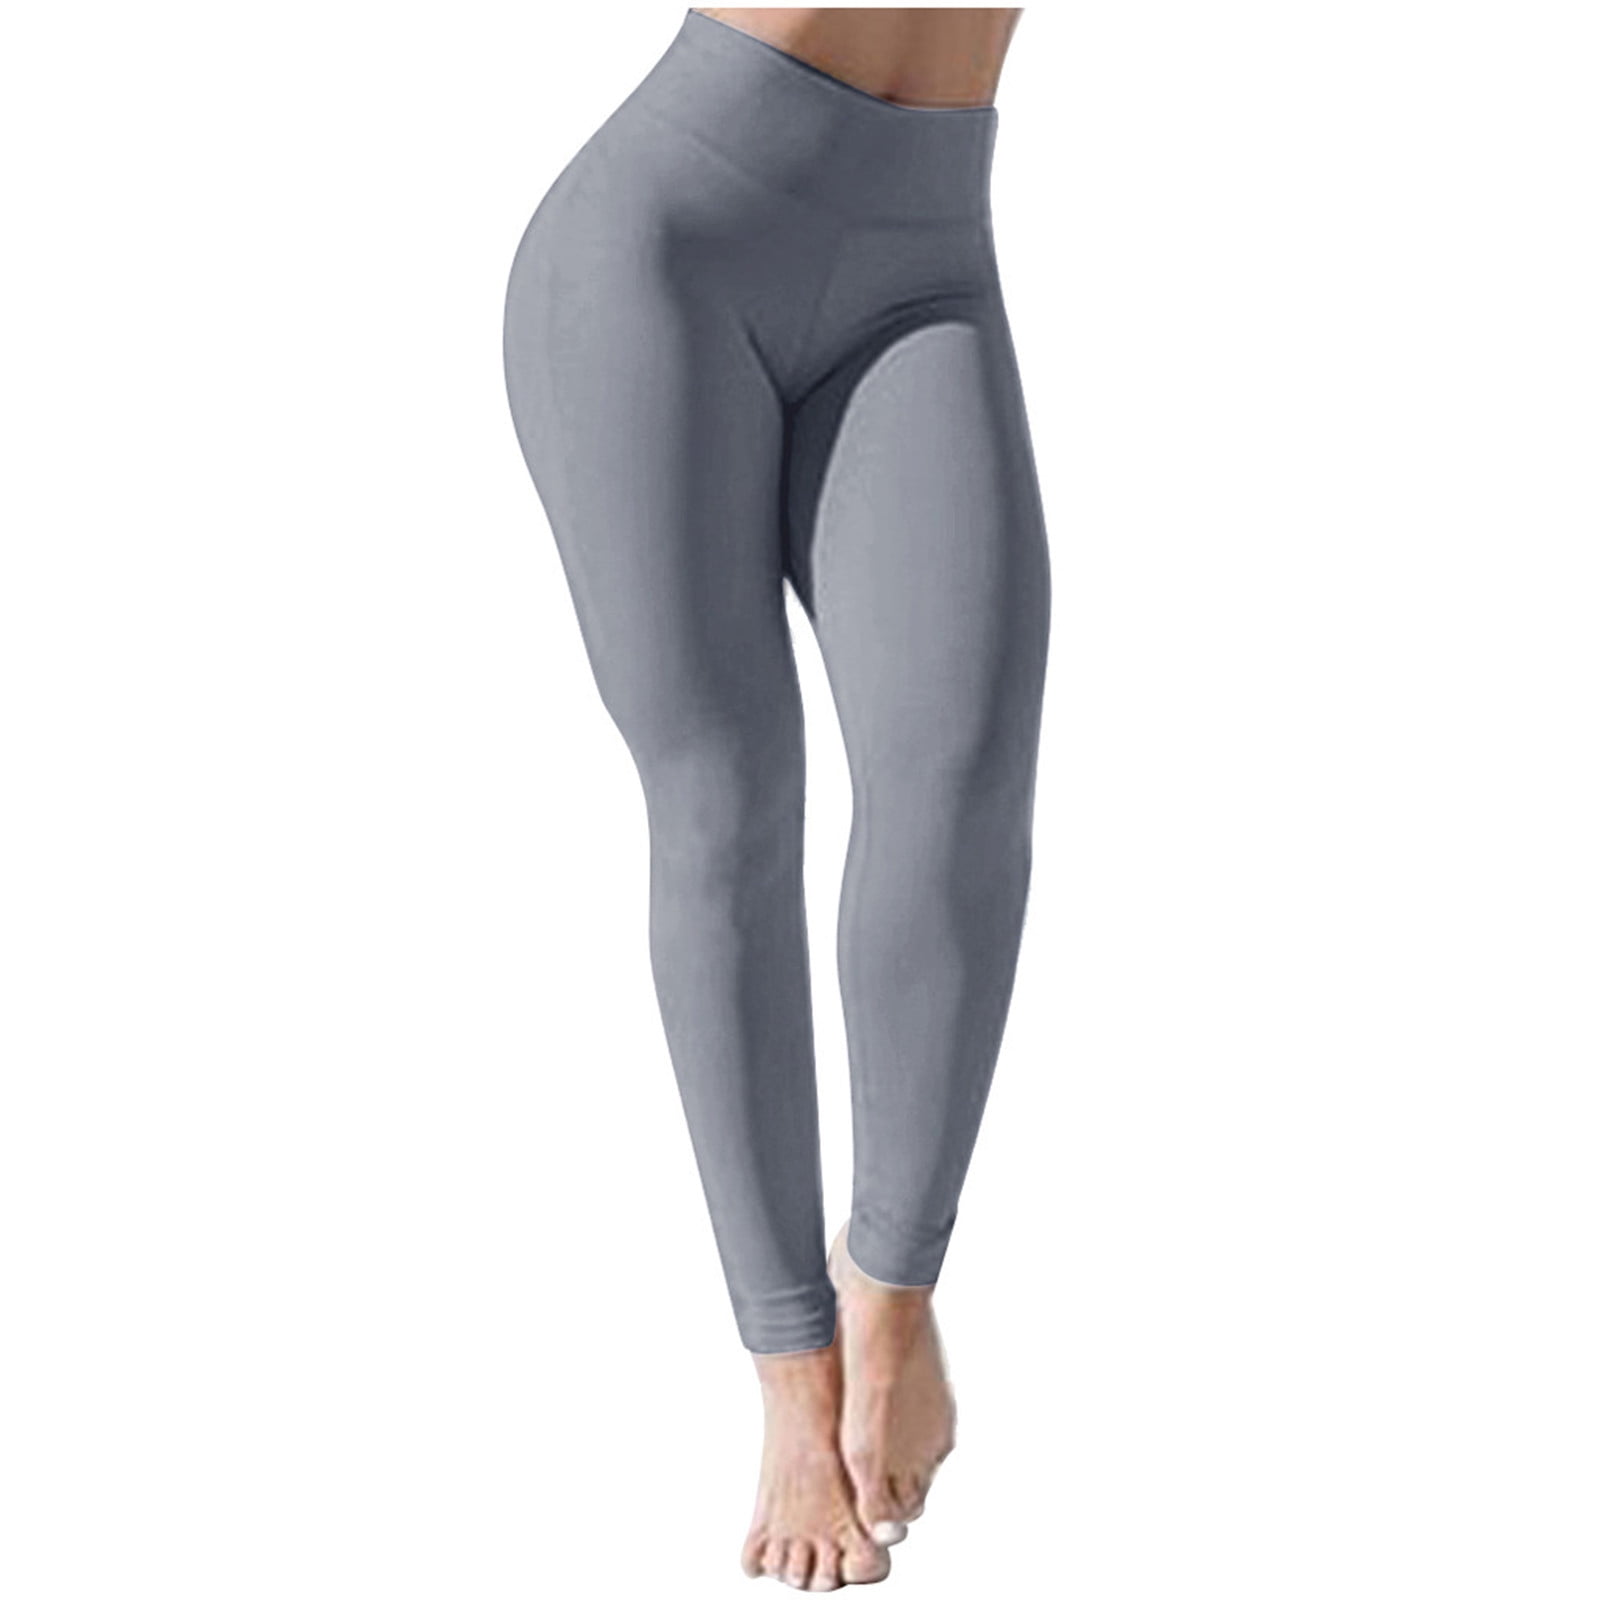 Summer Pants Saving! Funicet Pants for Women Soft High Waist Stretch  Pleated Yoga Pants Casual Fitness Leggings Trouser Gray S 